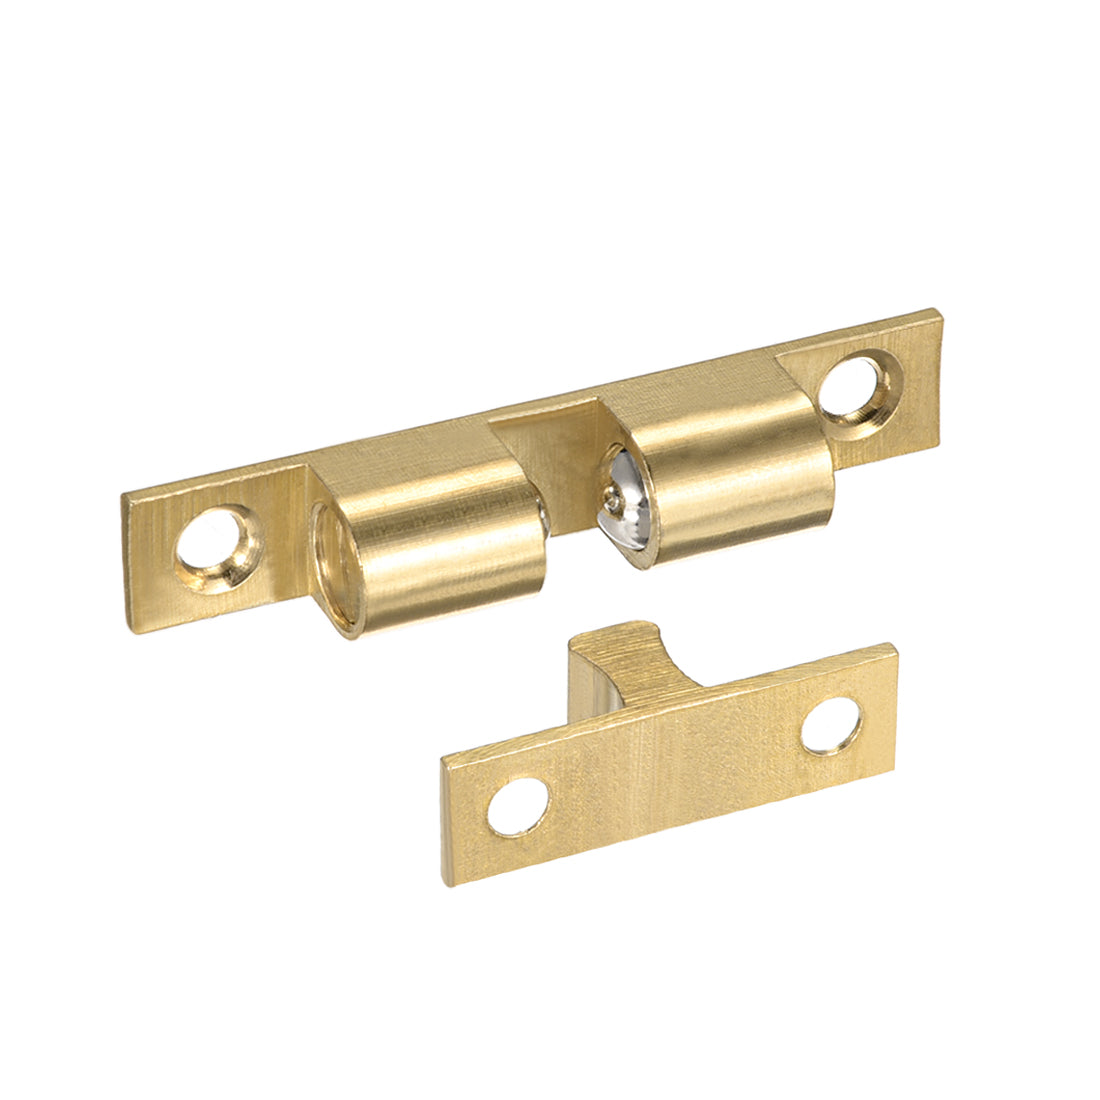 uxcell Uxcell Cabinet Door Closet Brass Double Ball Catch Tension Latch 60mm Length Gold Tone 2pcs